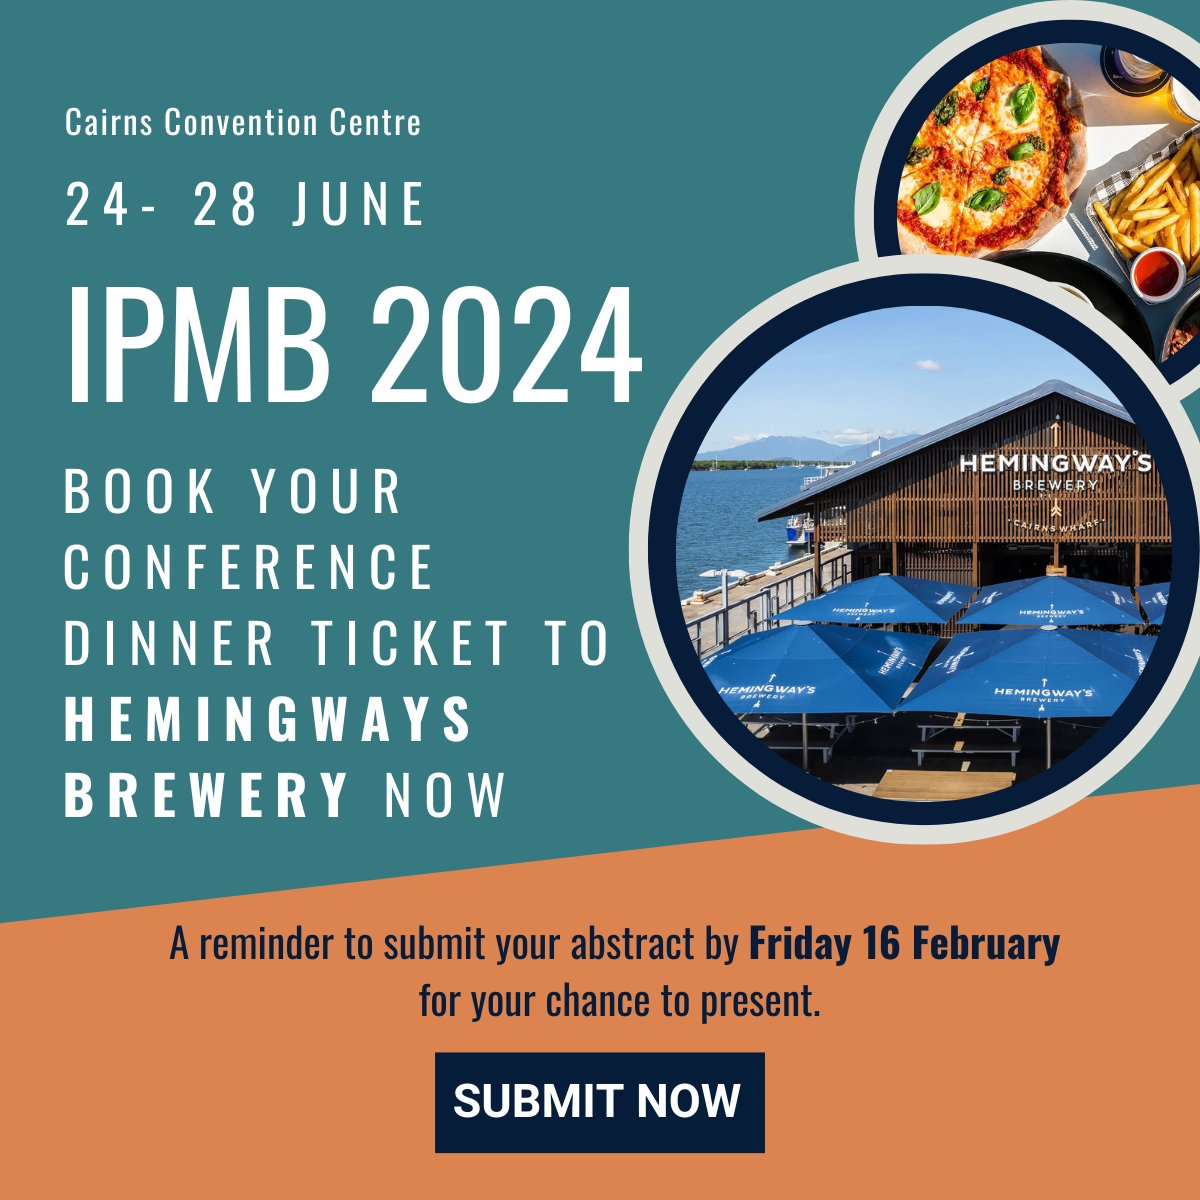 #IPMB2024 Abstract submissions close in less than 10 days! Book your conference ticket to Hemingways Brewery now! Visit ipmb2024.org for more information.